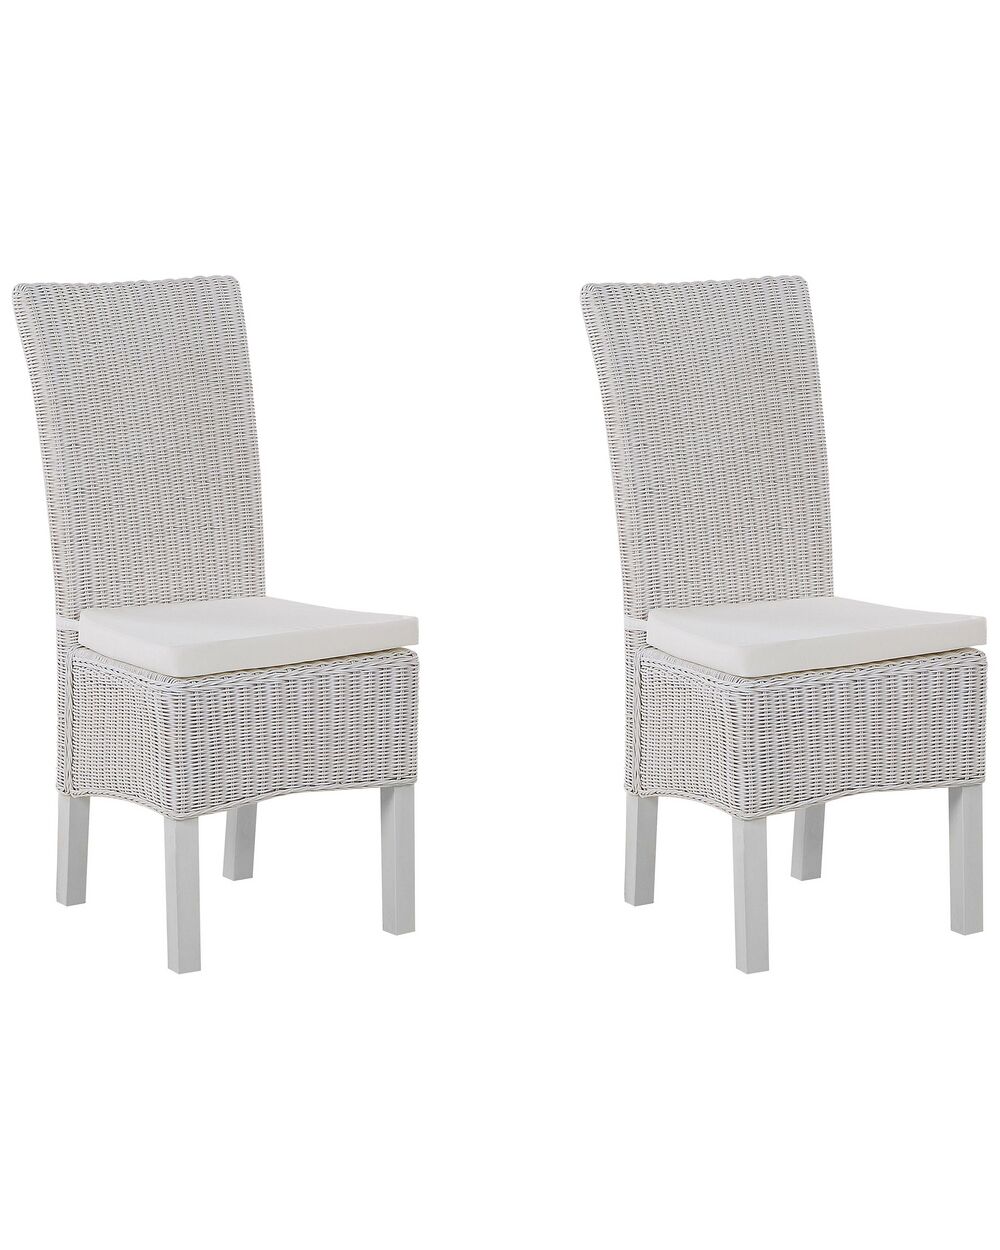 Rattan Dining Chairs White Andes